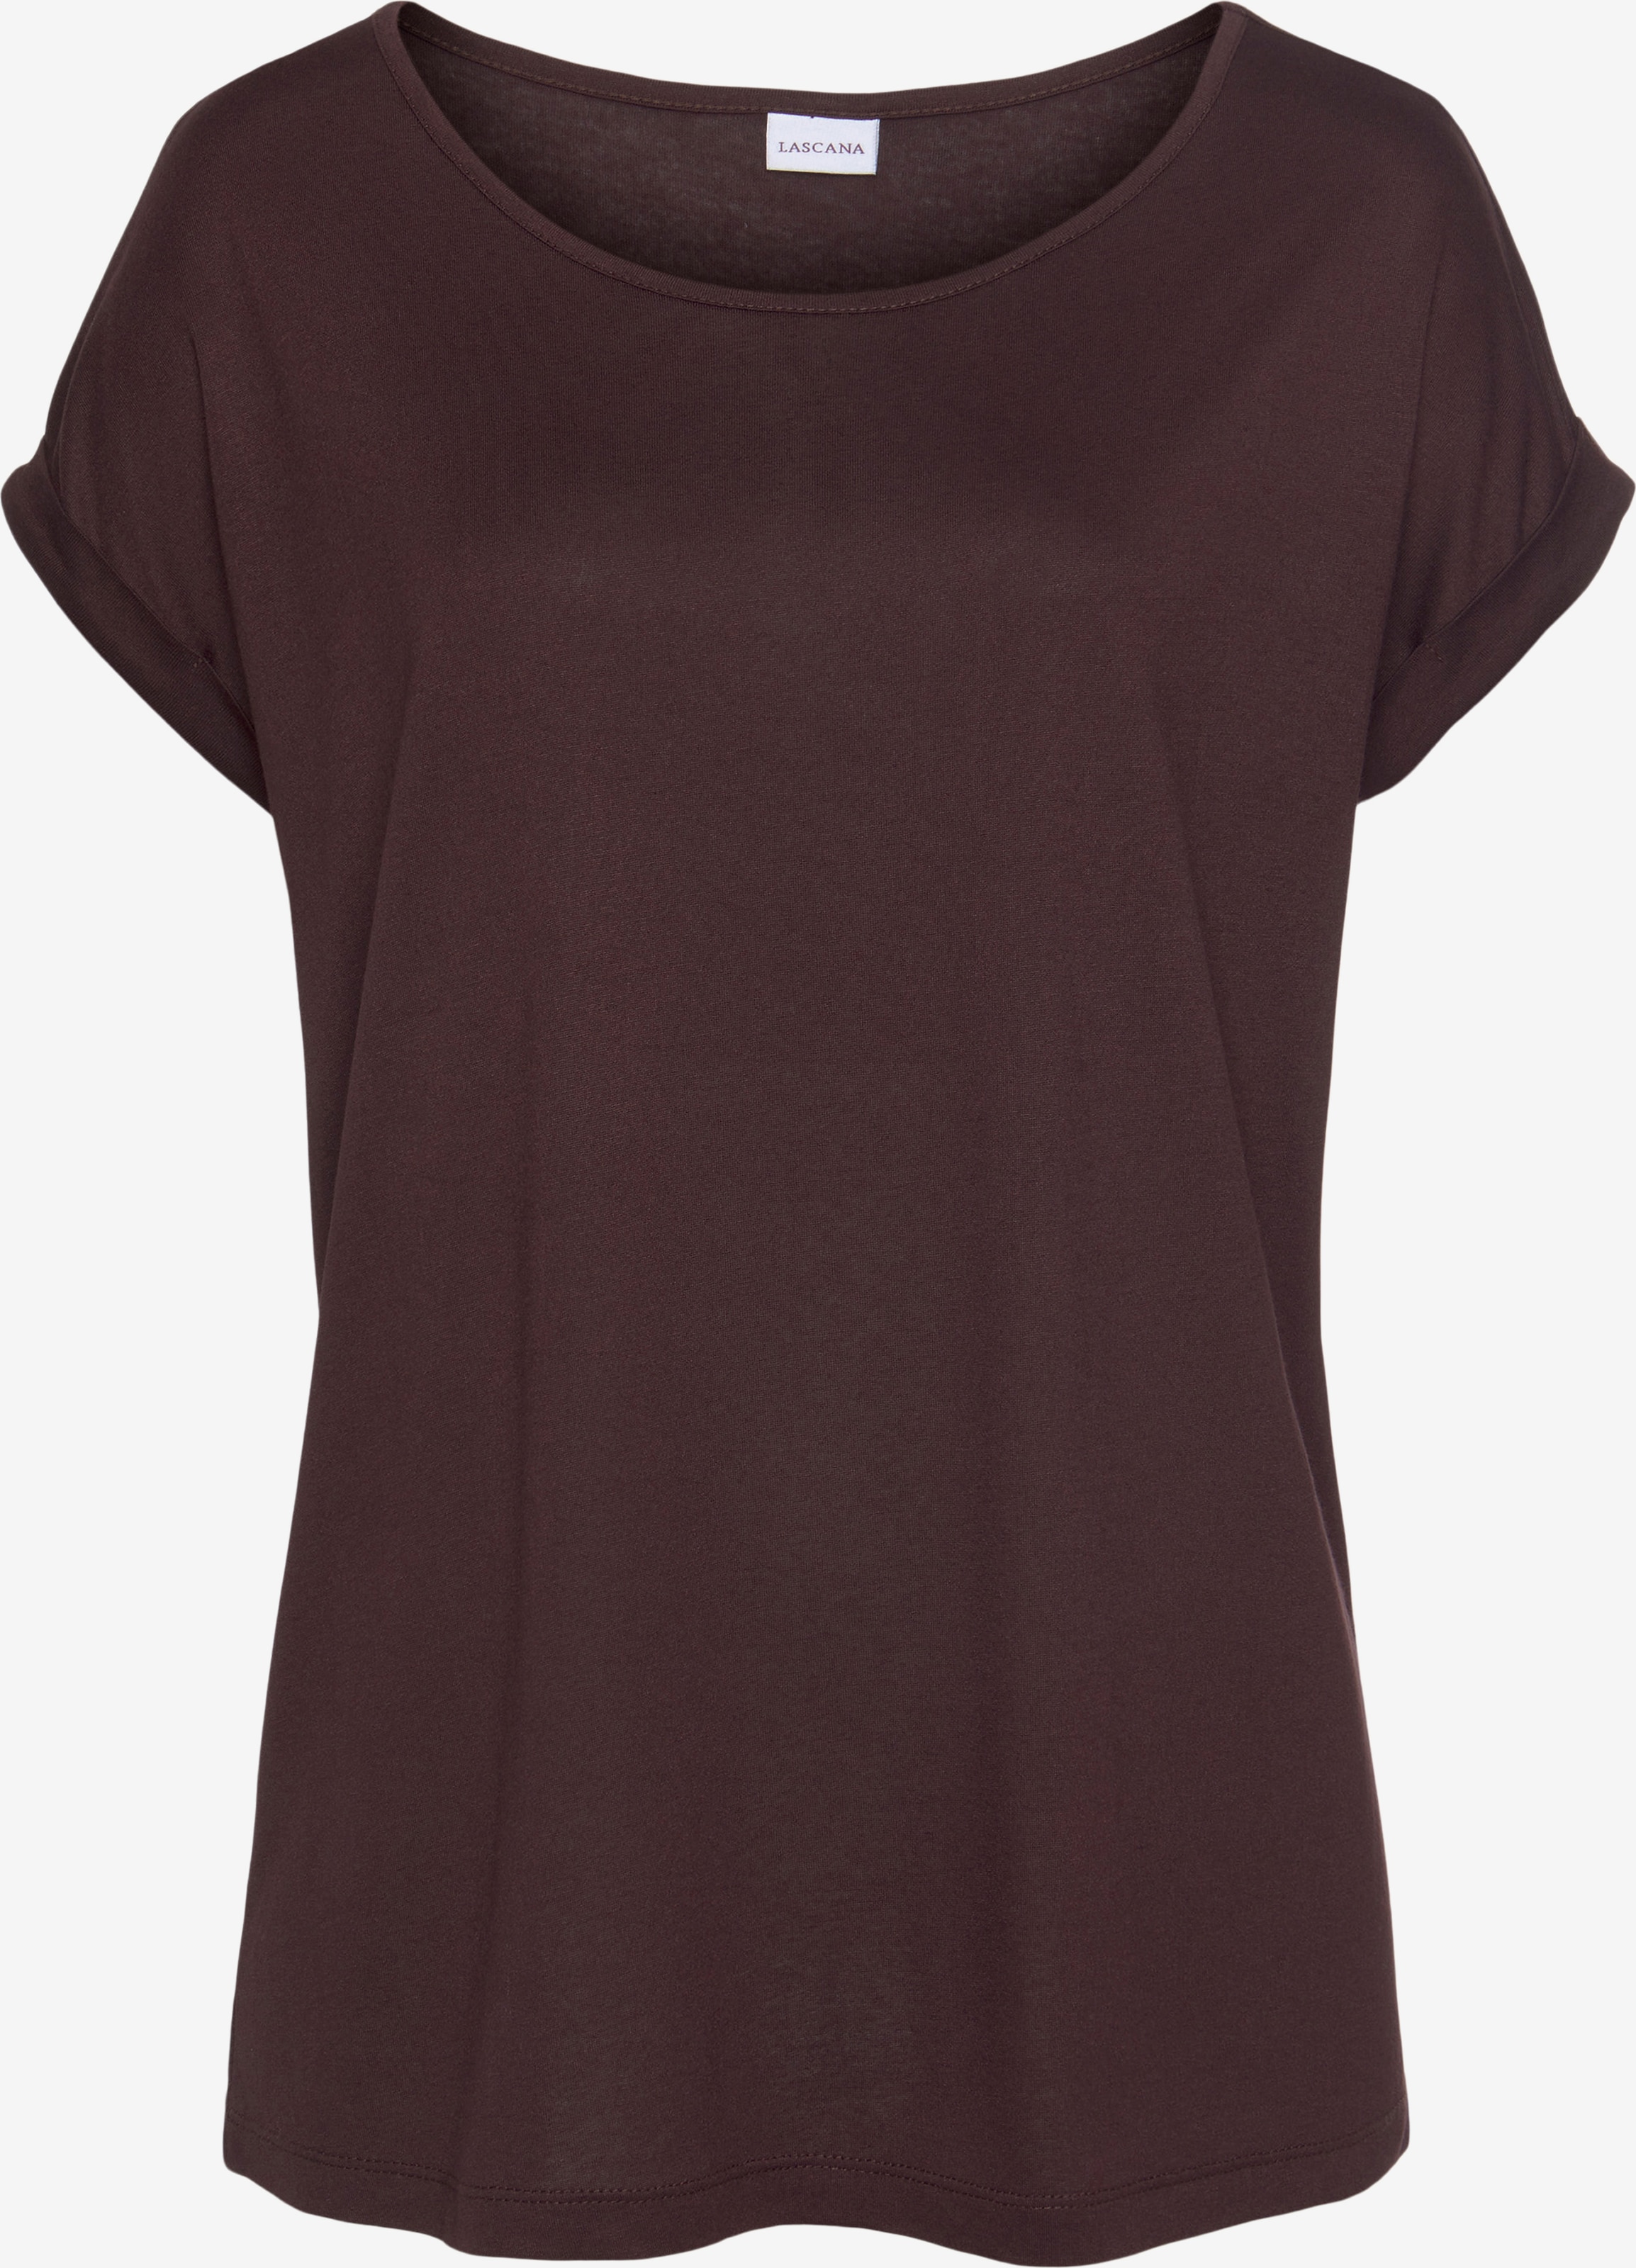 LASCANA Shirt in Aubergine | ABOUT YOU